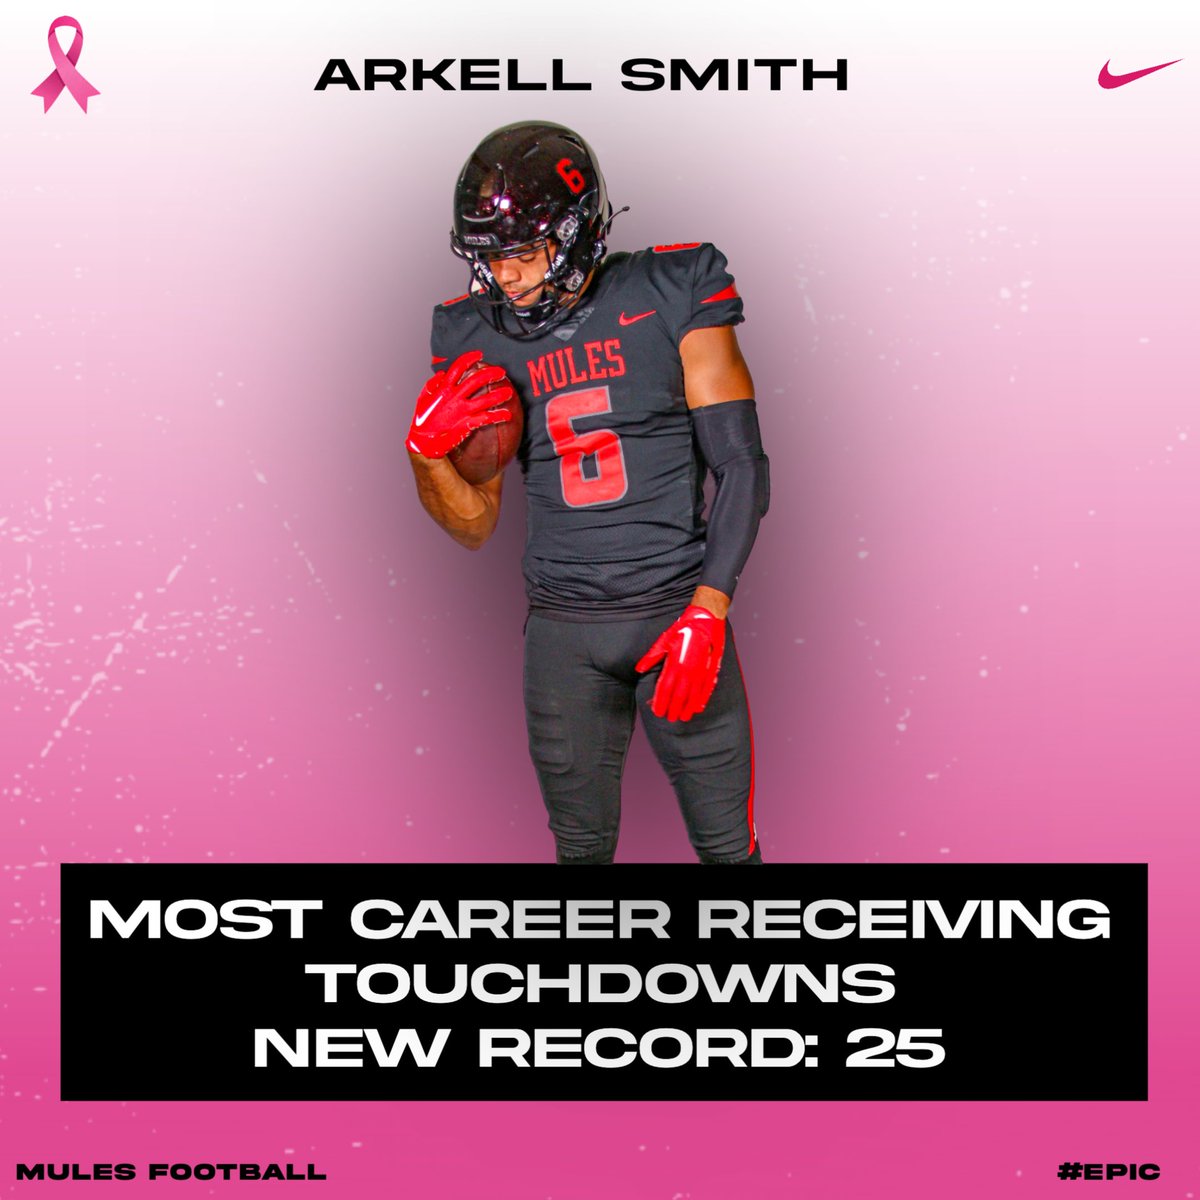 RECORD BREAKER! Arkell Smith now holds the record for most career receiving touchdowns with 25, surpassing Jamorris Warrens record of 24 set in 2009-2010! Congratulations Arkell! #teamUCM X #EPIC